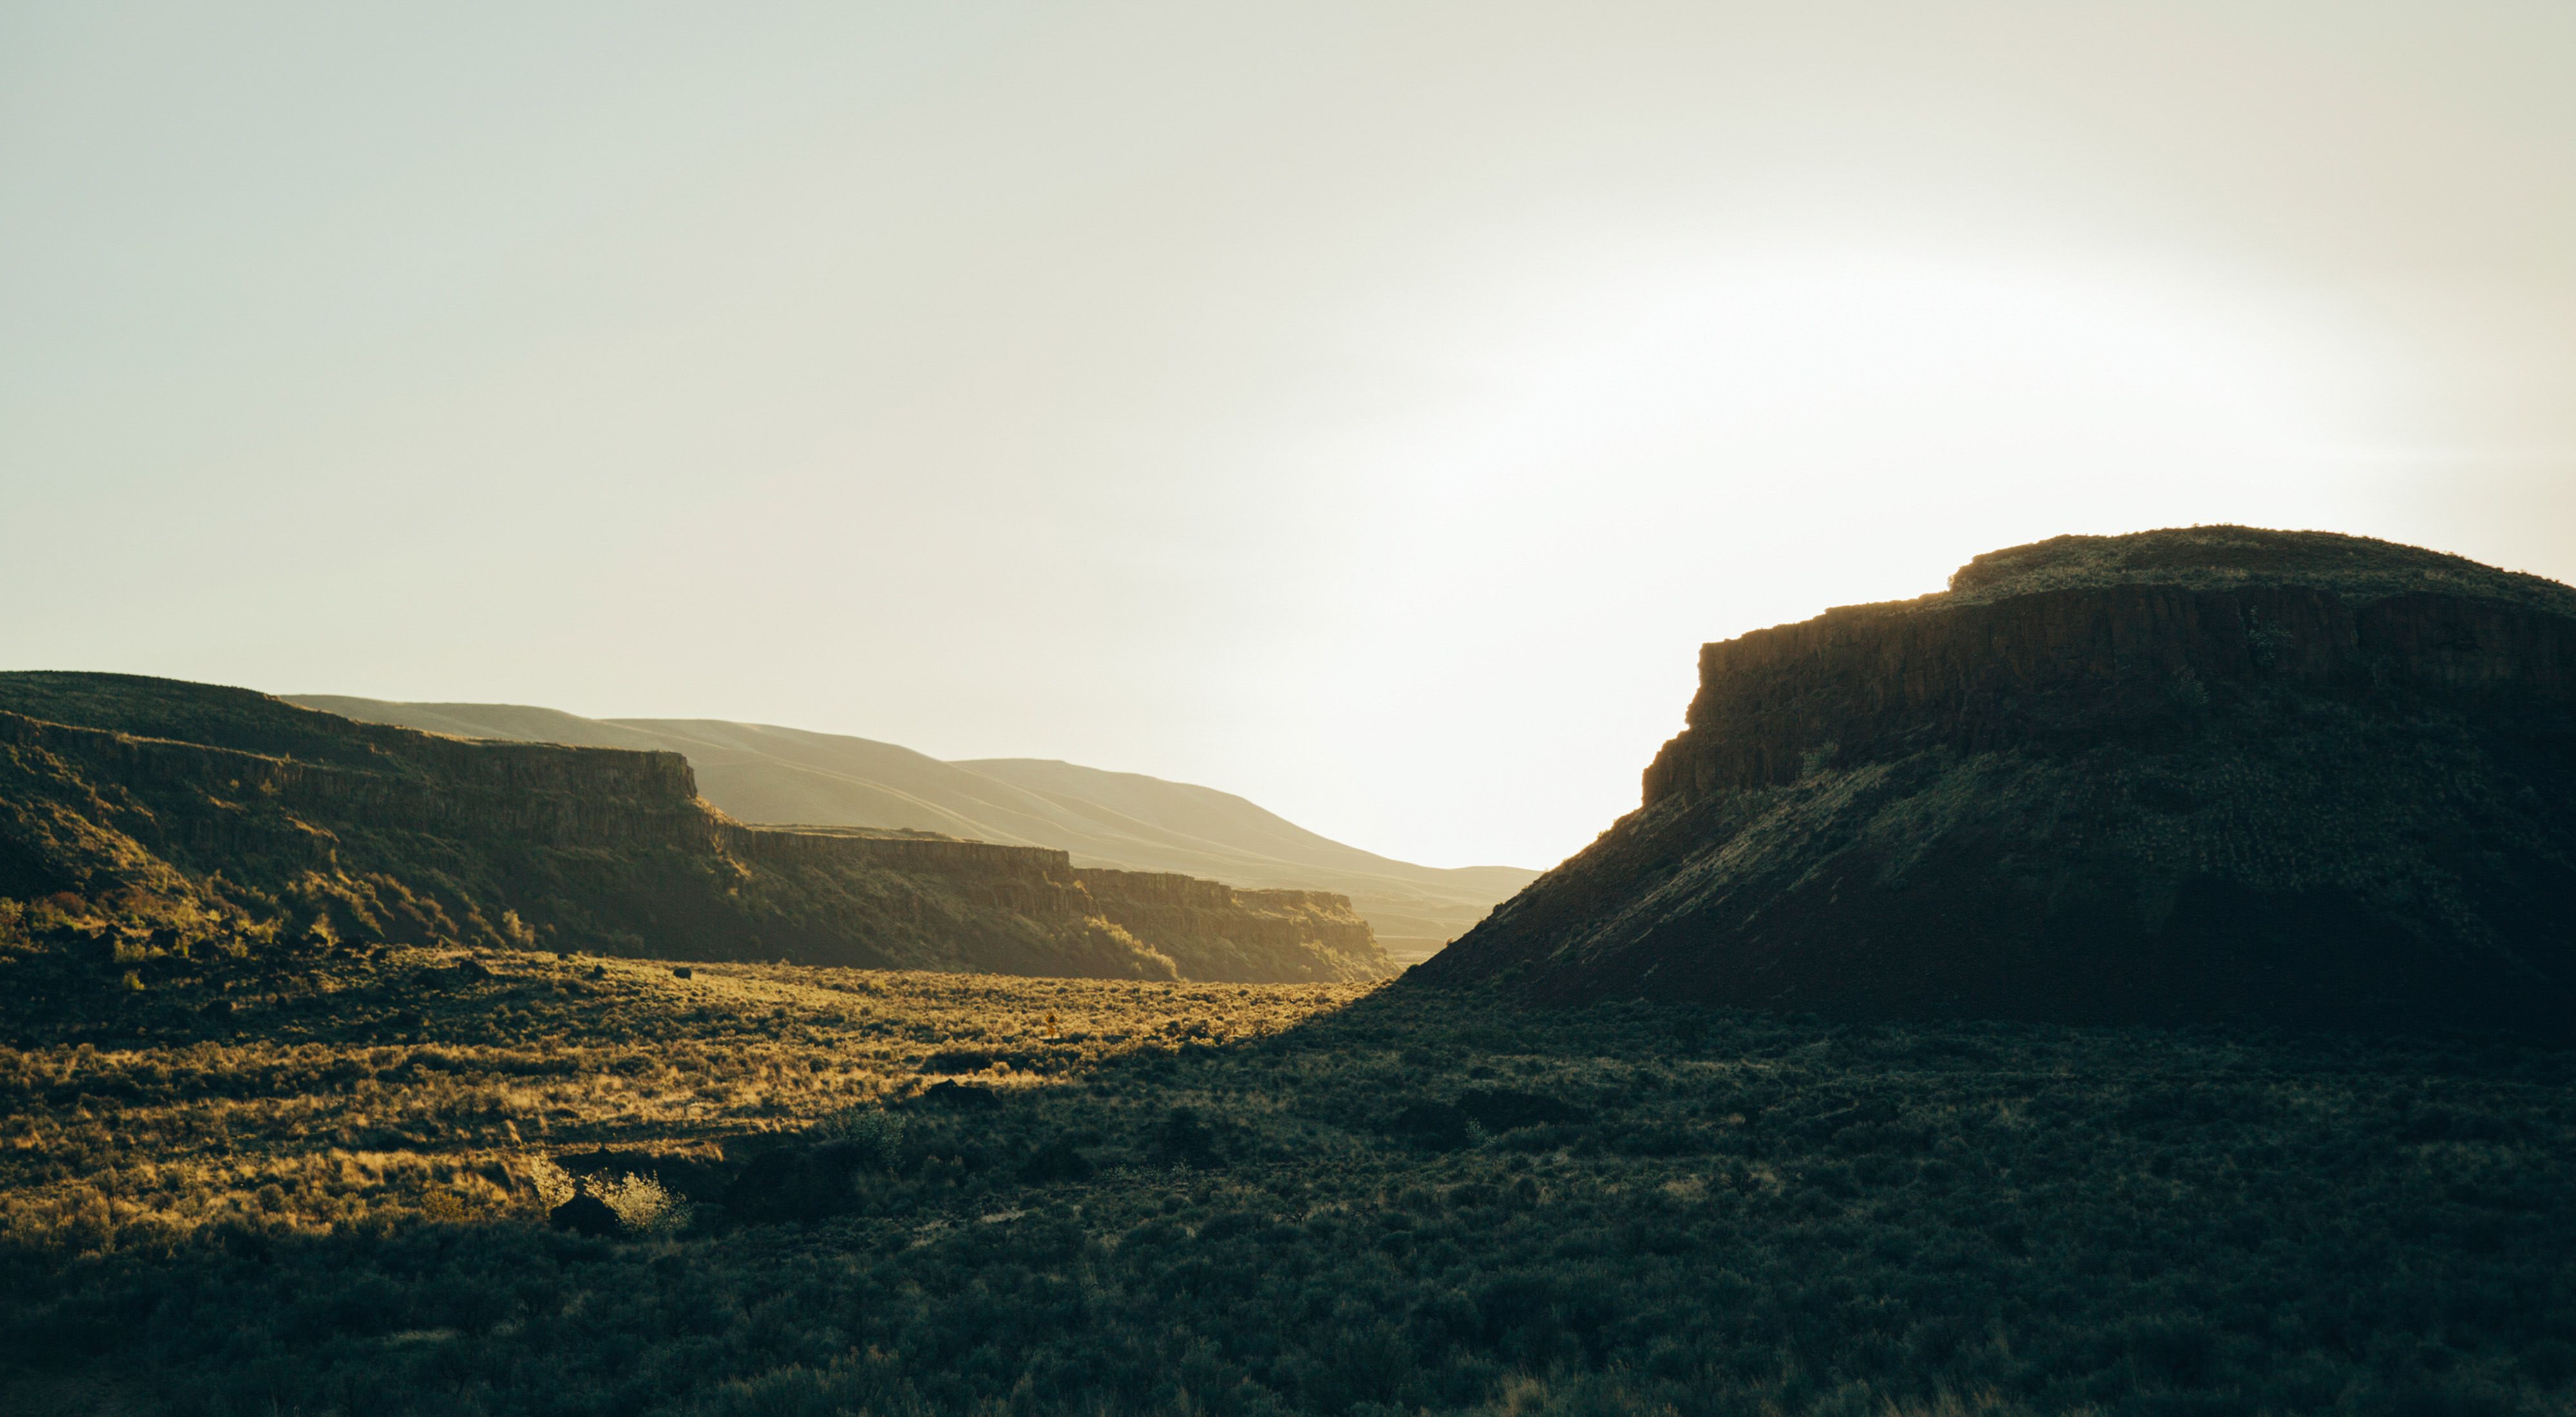 Silhouette of arid, rugged cliffs backlit by sunlight with steppe in the foreground.